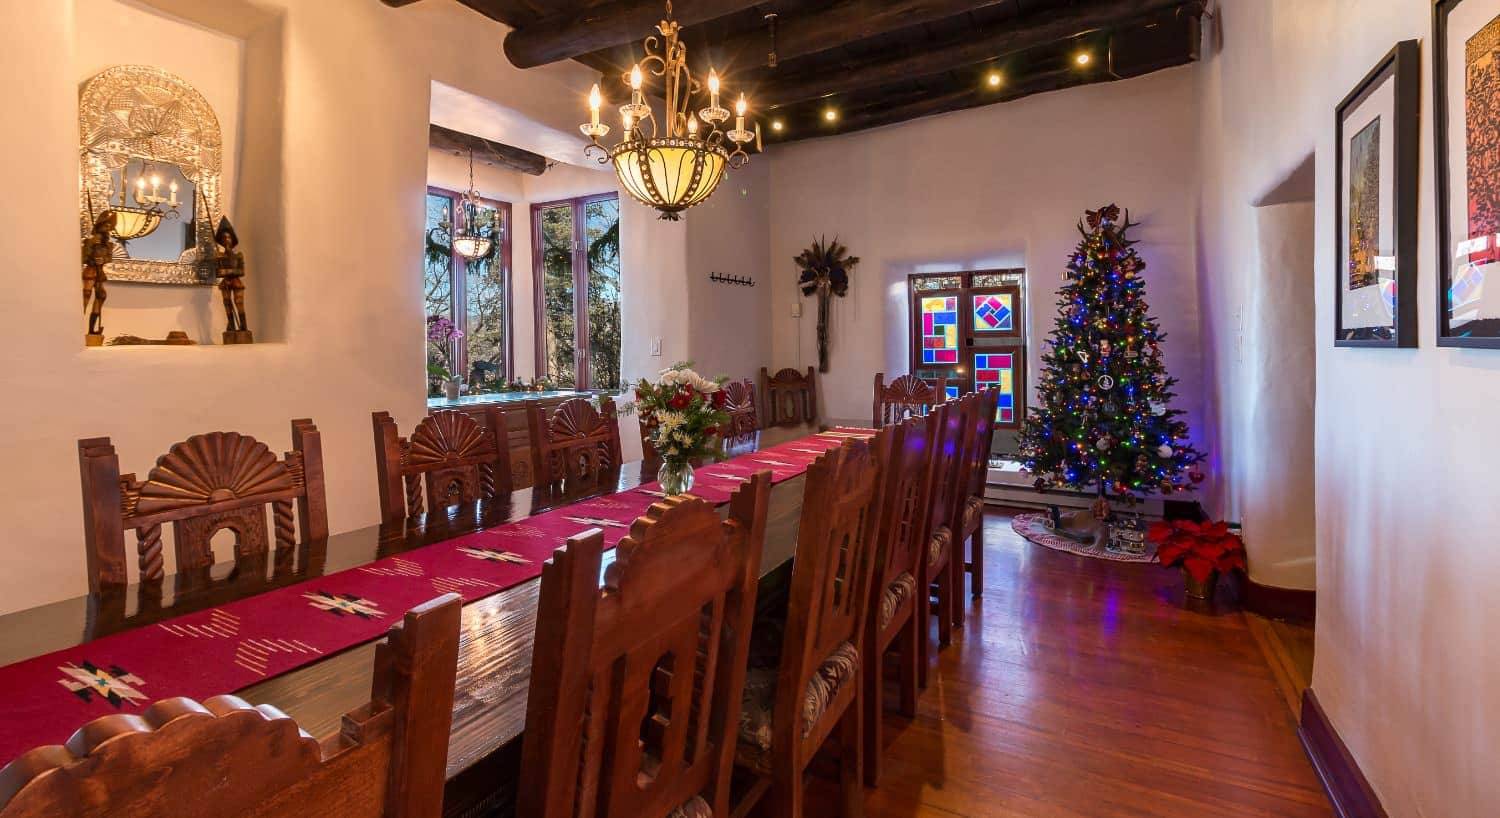 Large dining area with hardwood floors, wooden table and chairs, and Christmas tree